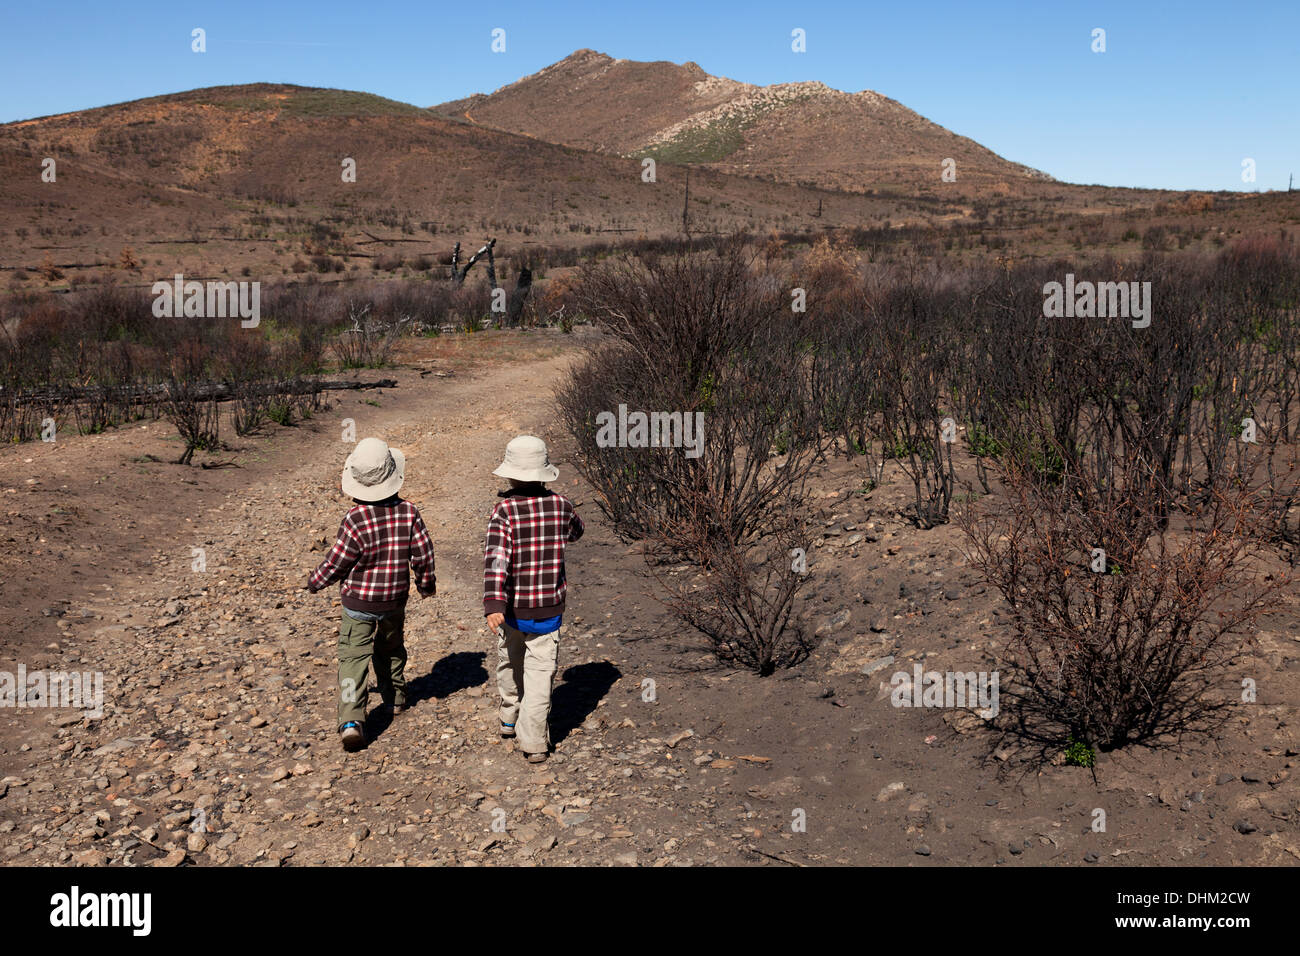 Two Brothers, aged 5 and 6, hiking on the Garnet Peak Trail, Laguna Mountains, Cleveland national Forest, California Stock Photo